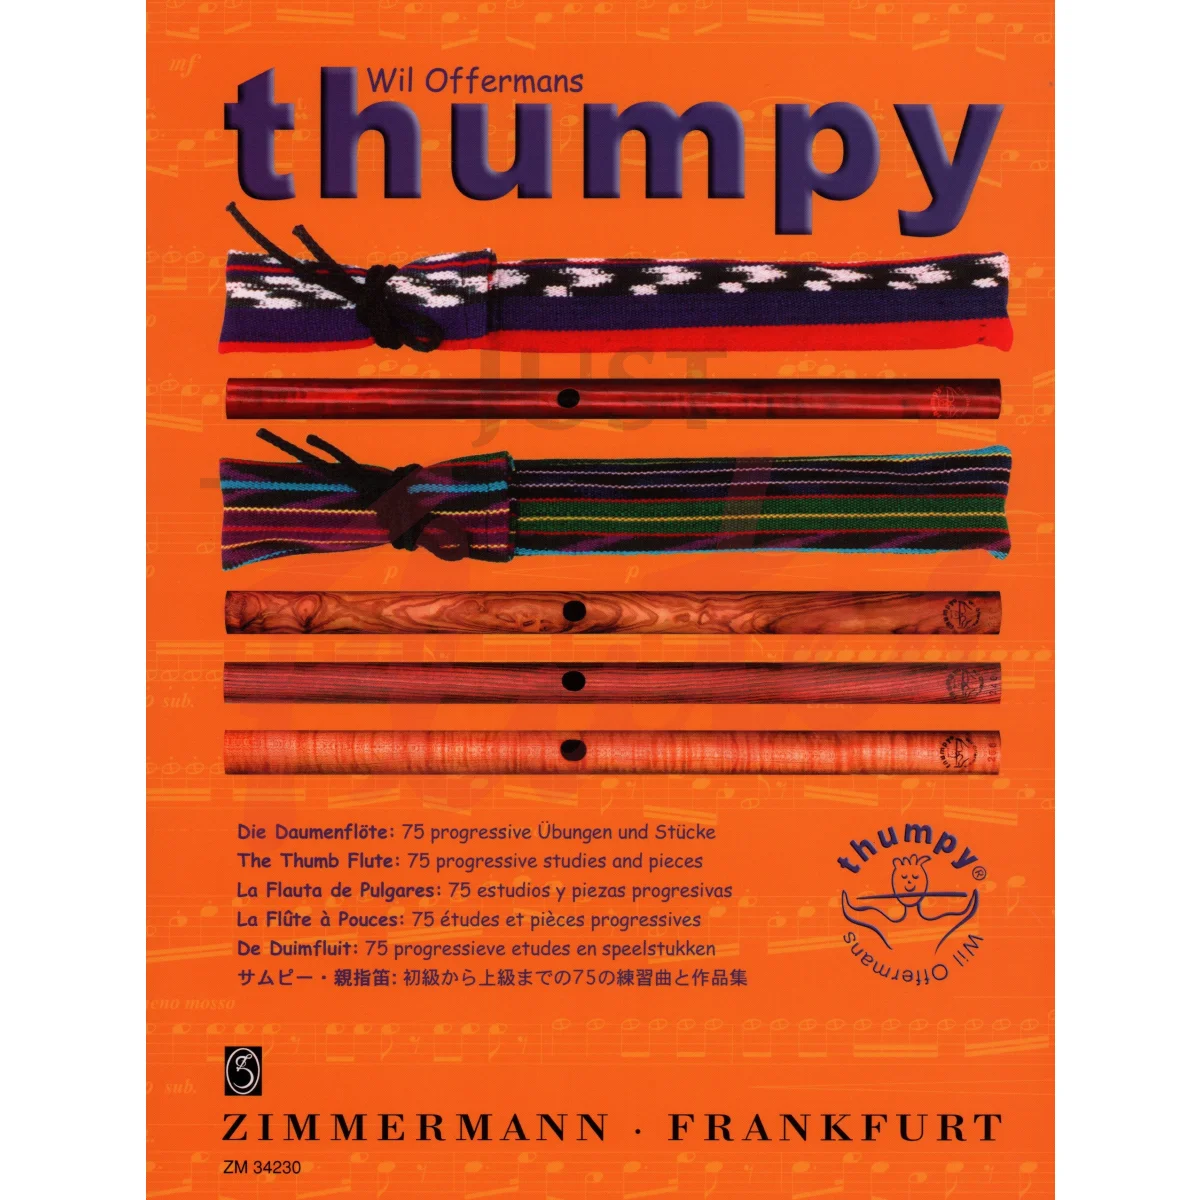 &#039;Thumpy&#039; for Thumpy Flute